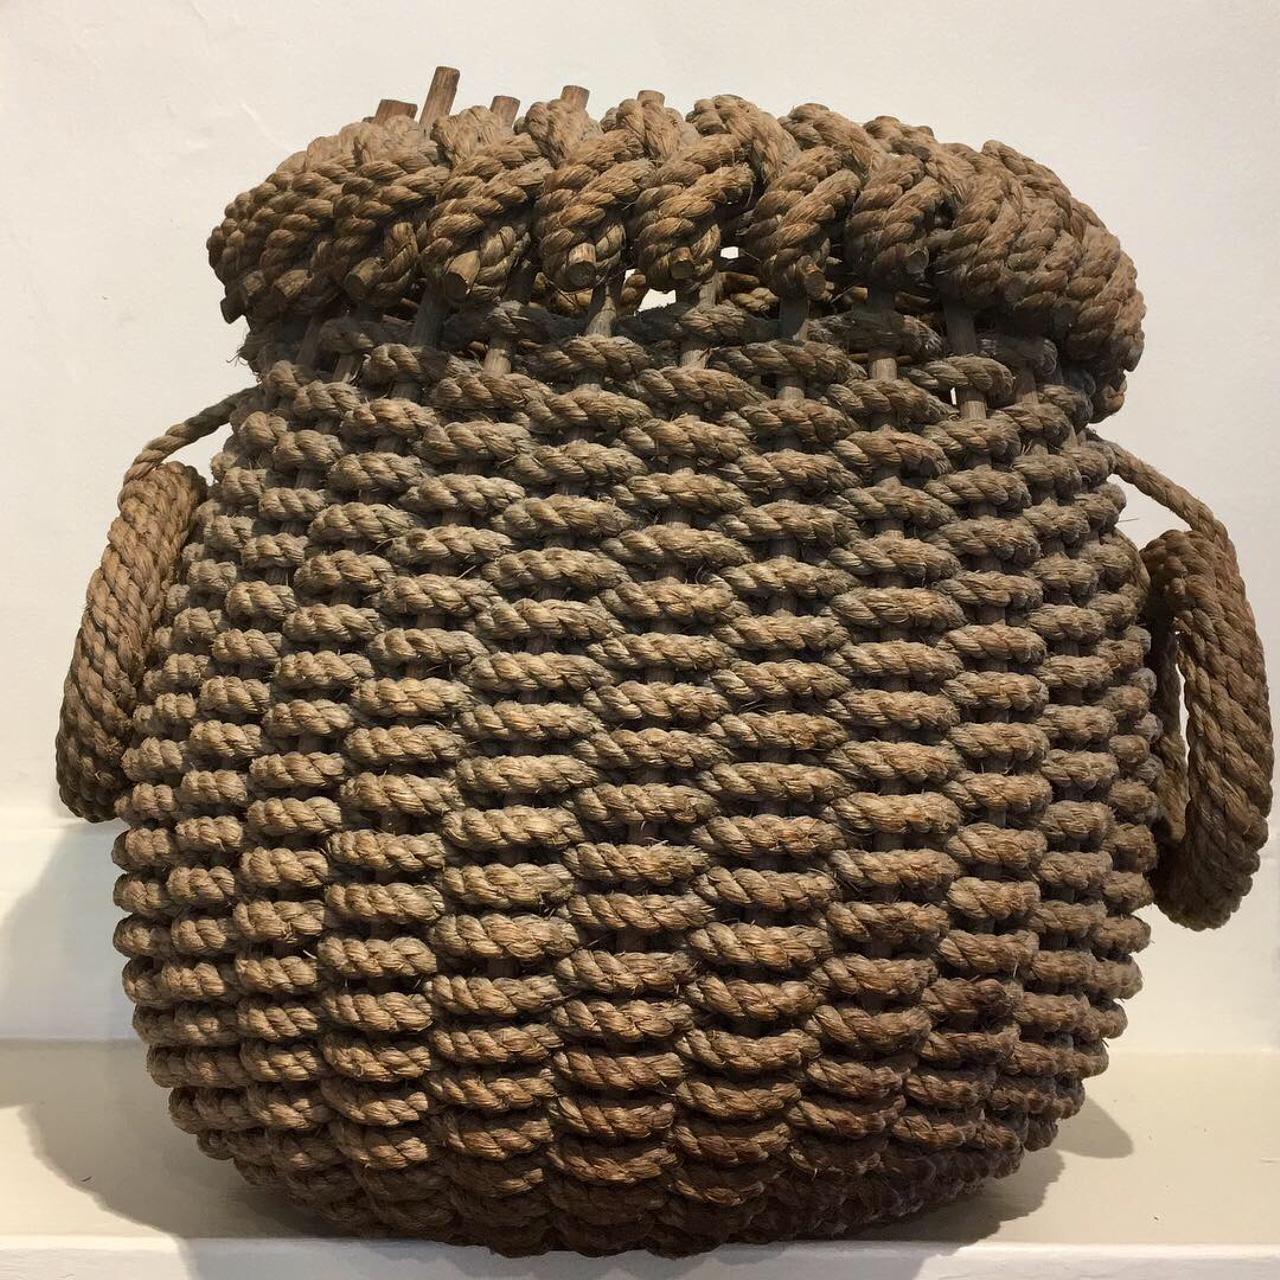 Late 19th century Fisherman's Rope Woven Eel Basket, circa 1890, a rare hand woven basket apparently unique to the New Jersey coast, with a coarse rope weave on twig staves, with solid wooden bottom, and rope becket handles. These baskets were used